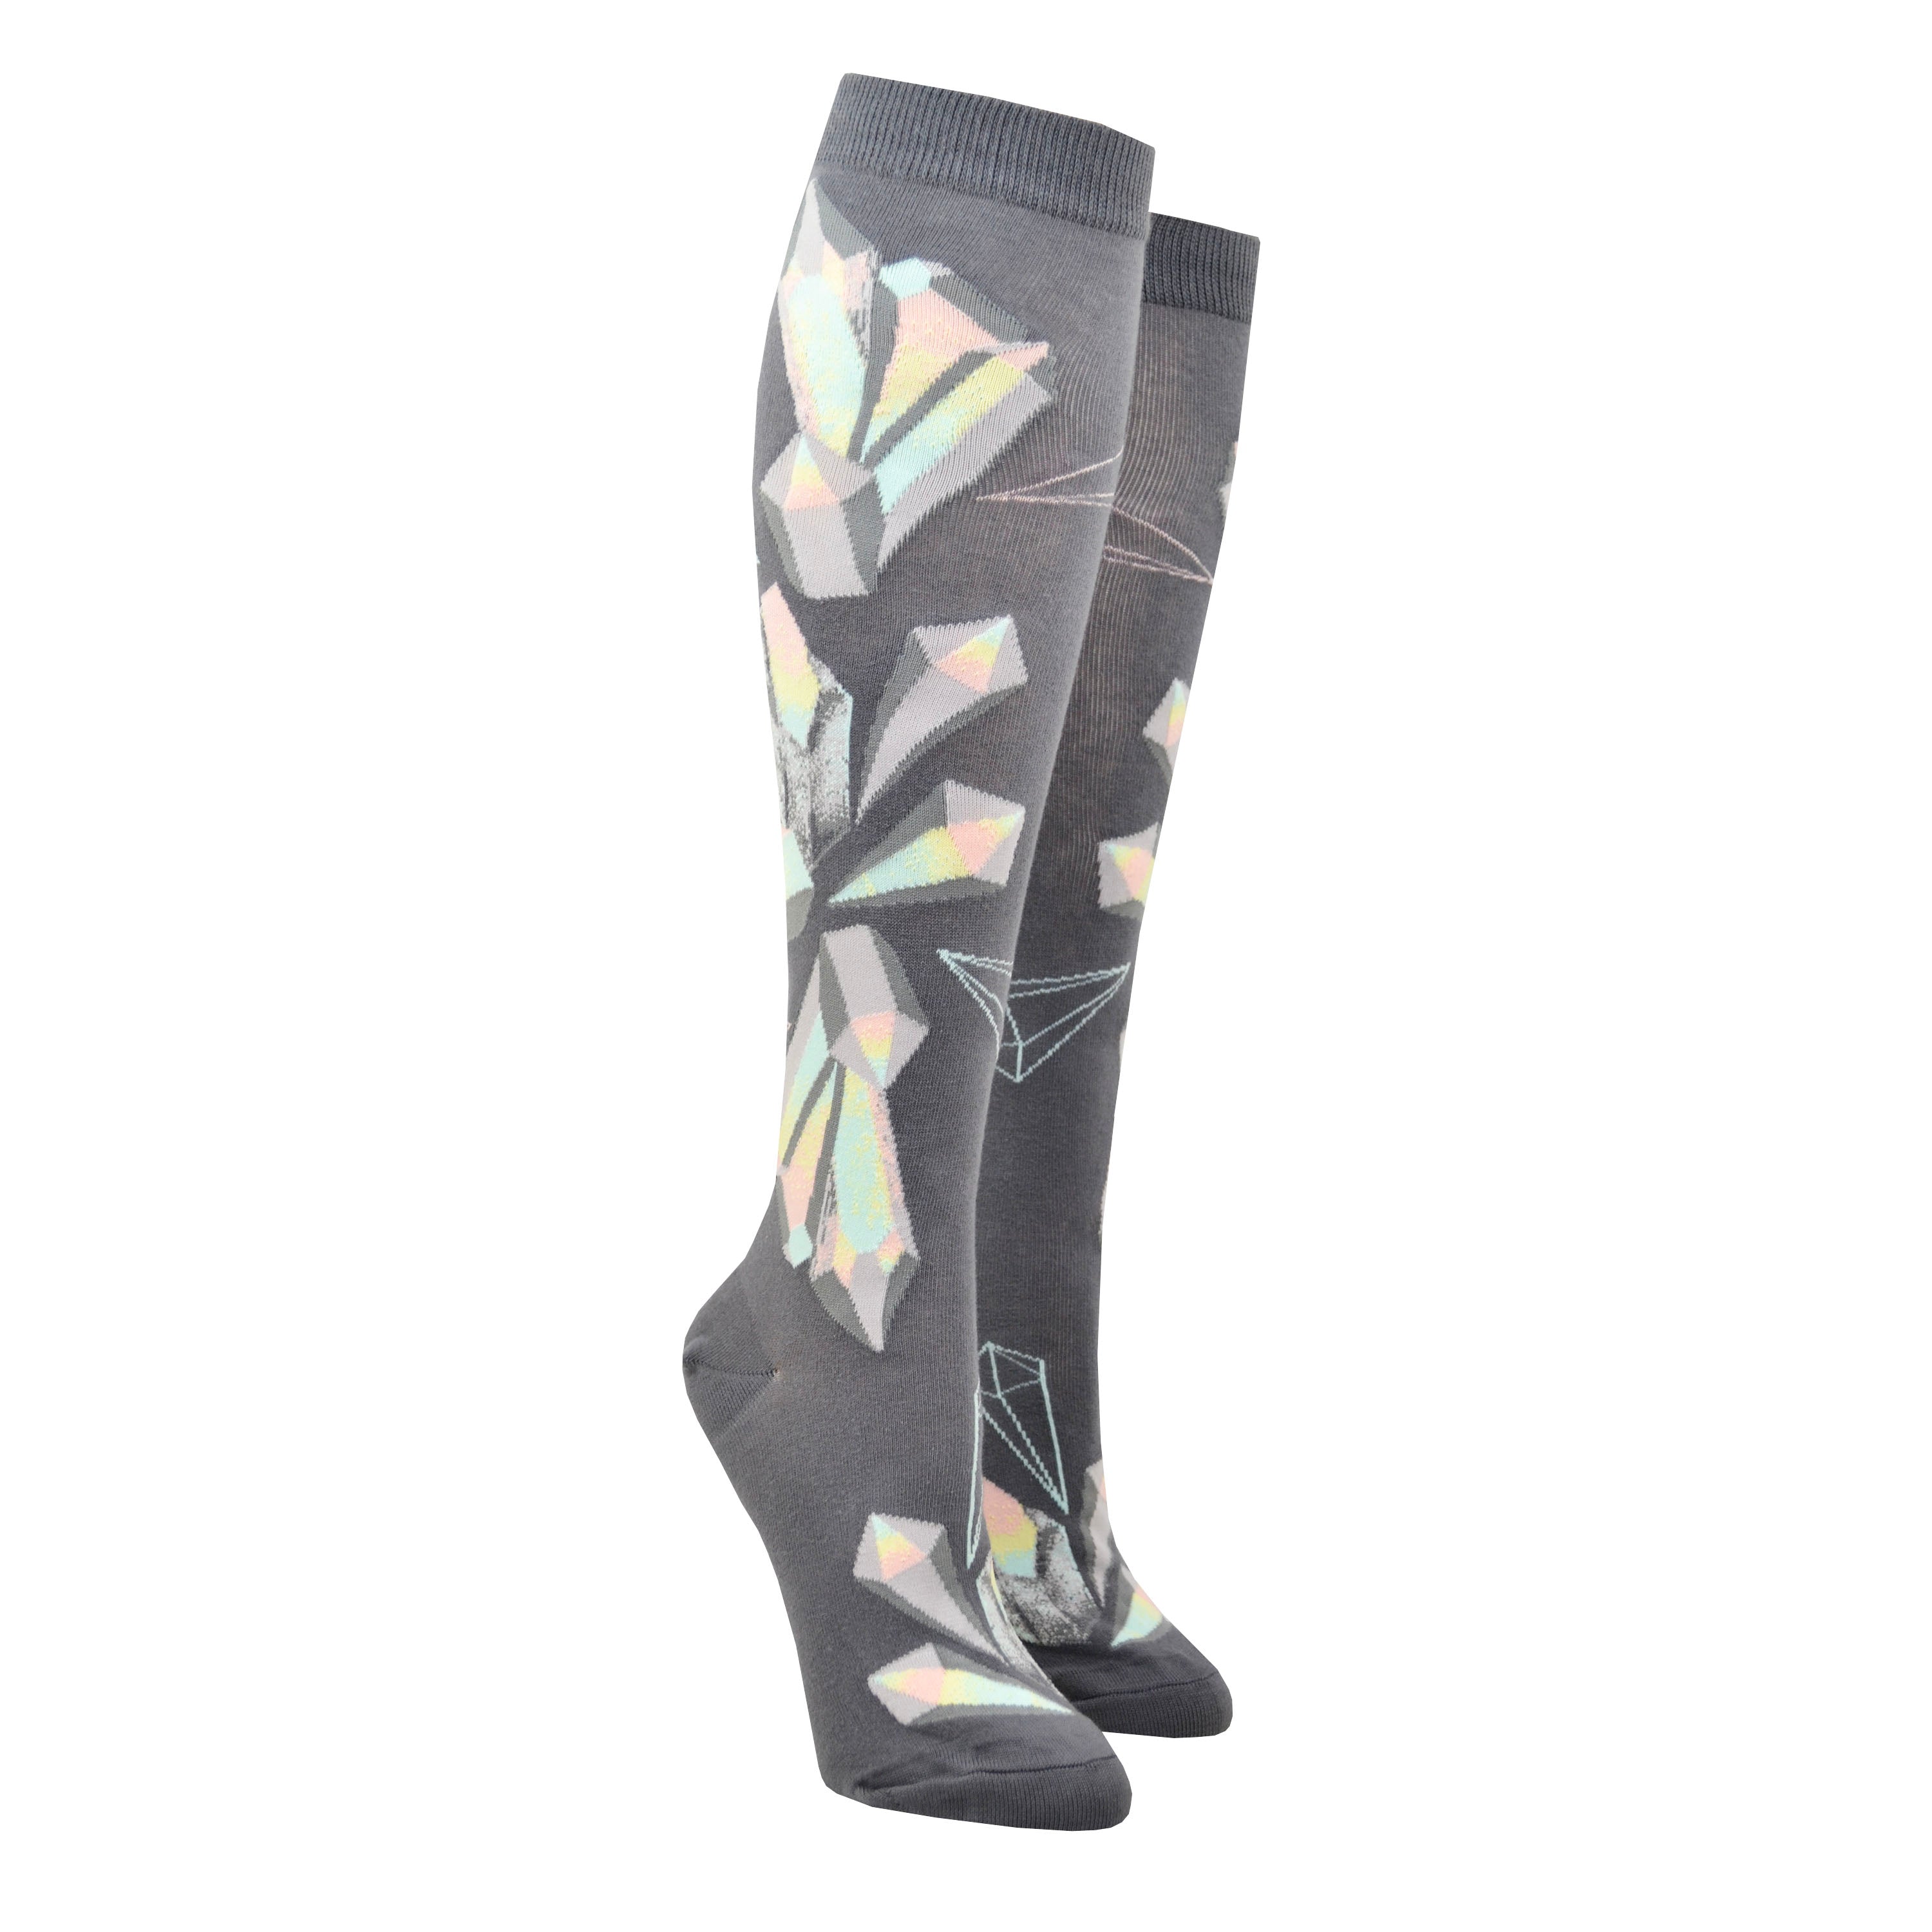 Shown on leg forms, a pair of ModSocks brand women's cotton knee highs. These grey socks feature an all over design of pastel blue, green, pink, and yellow crystals.